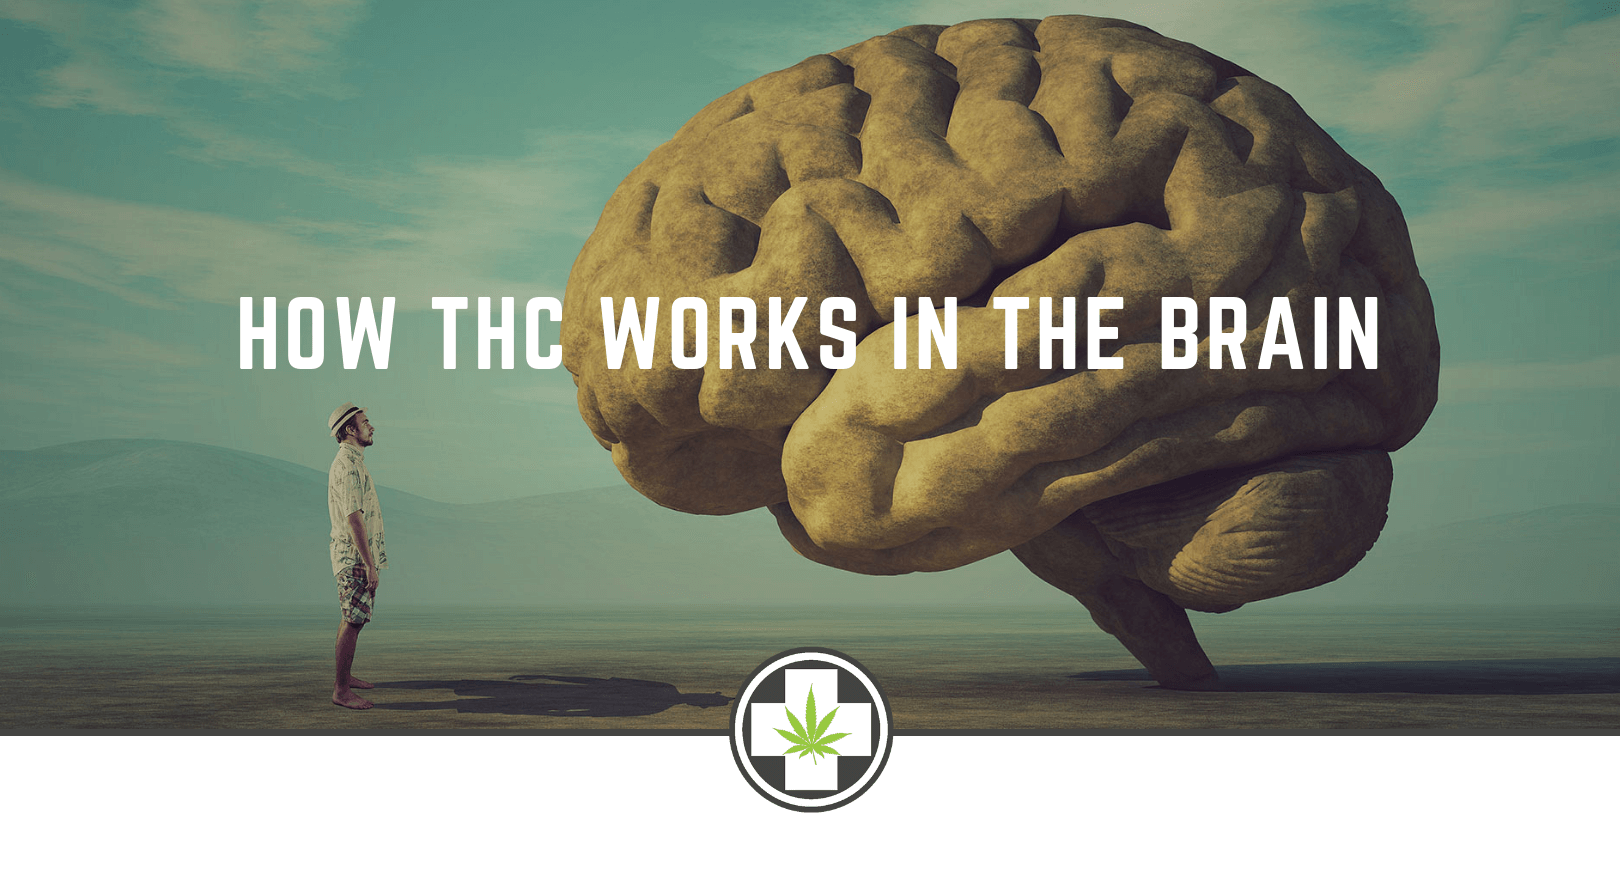 How THC Works in the Brain